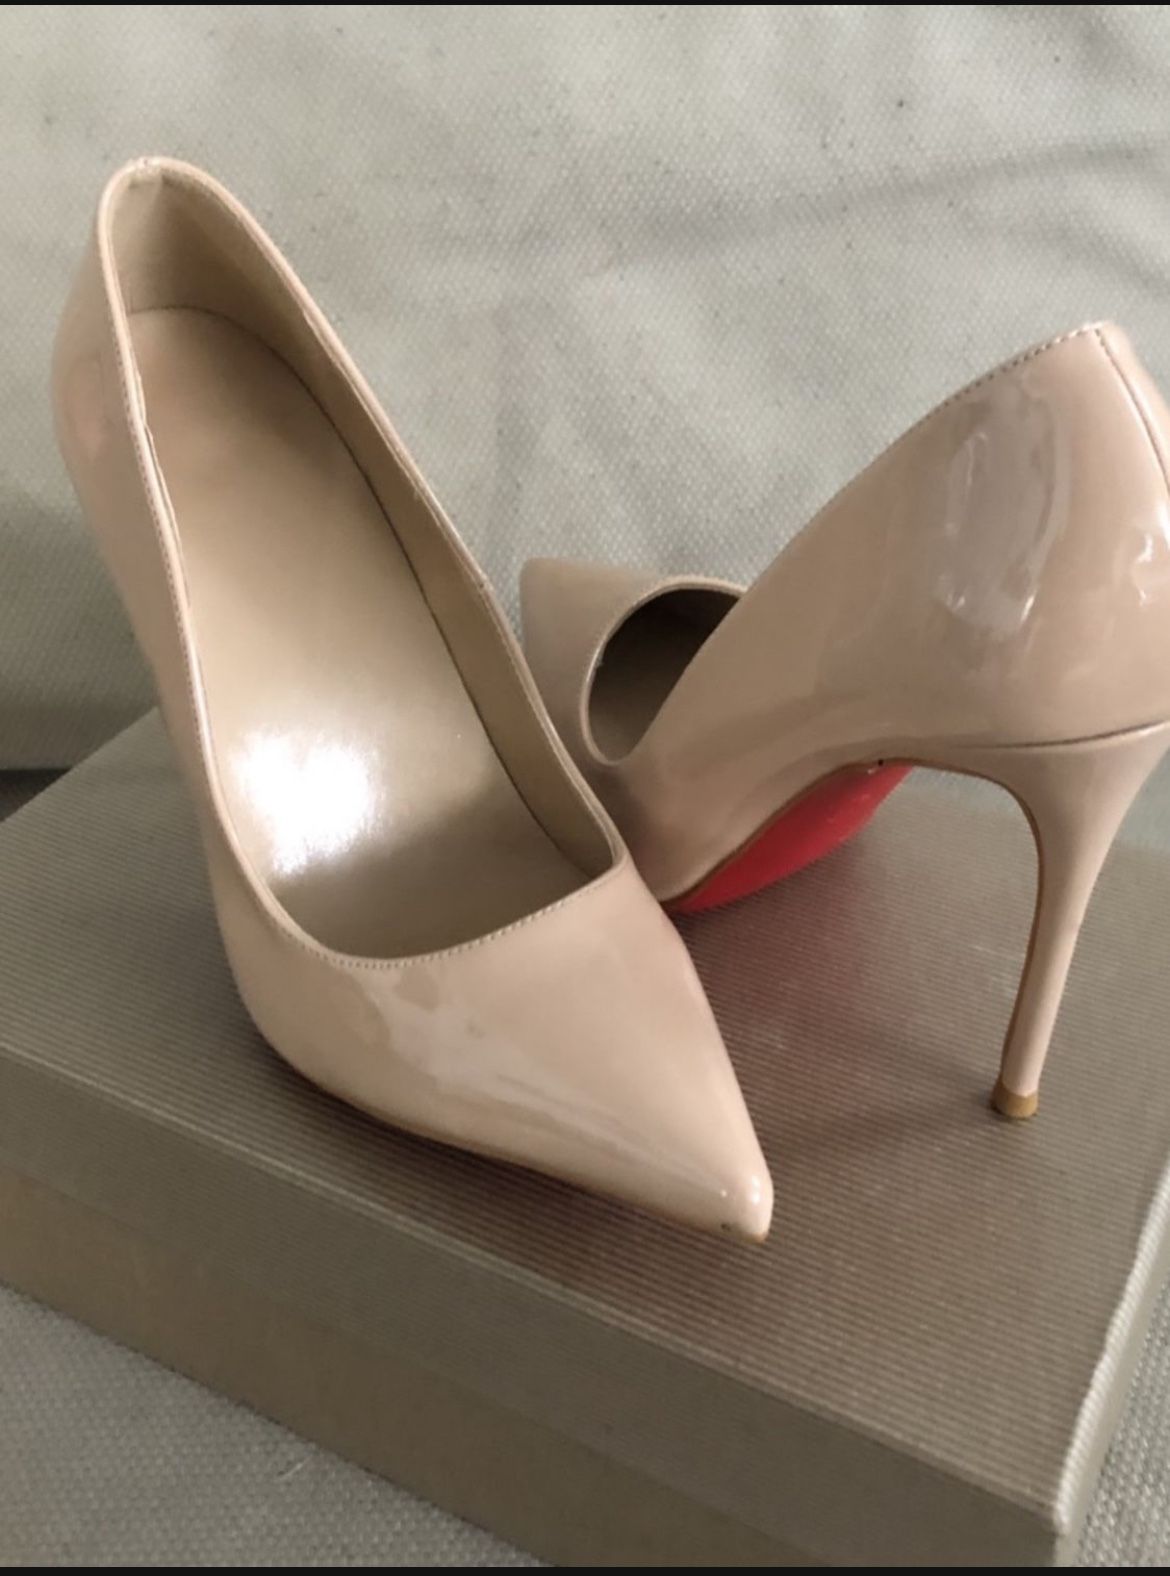 NEW Louboutin-inspired Pumps, Sz 38/7.5 US